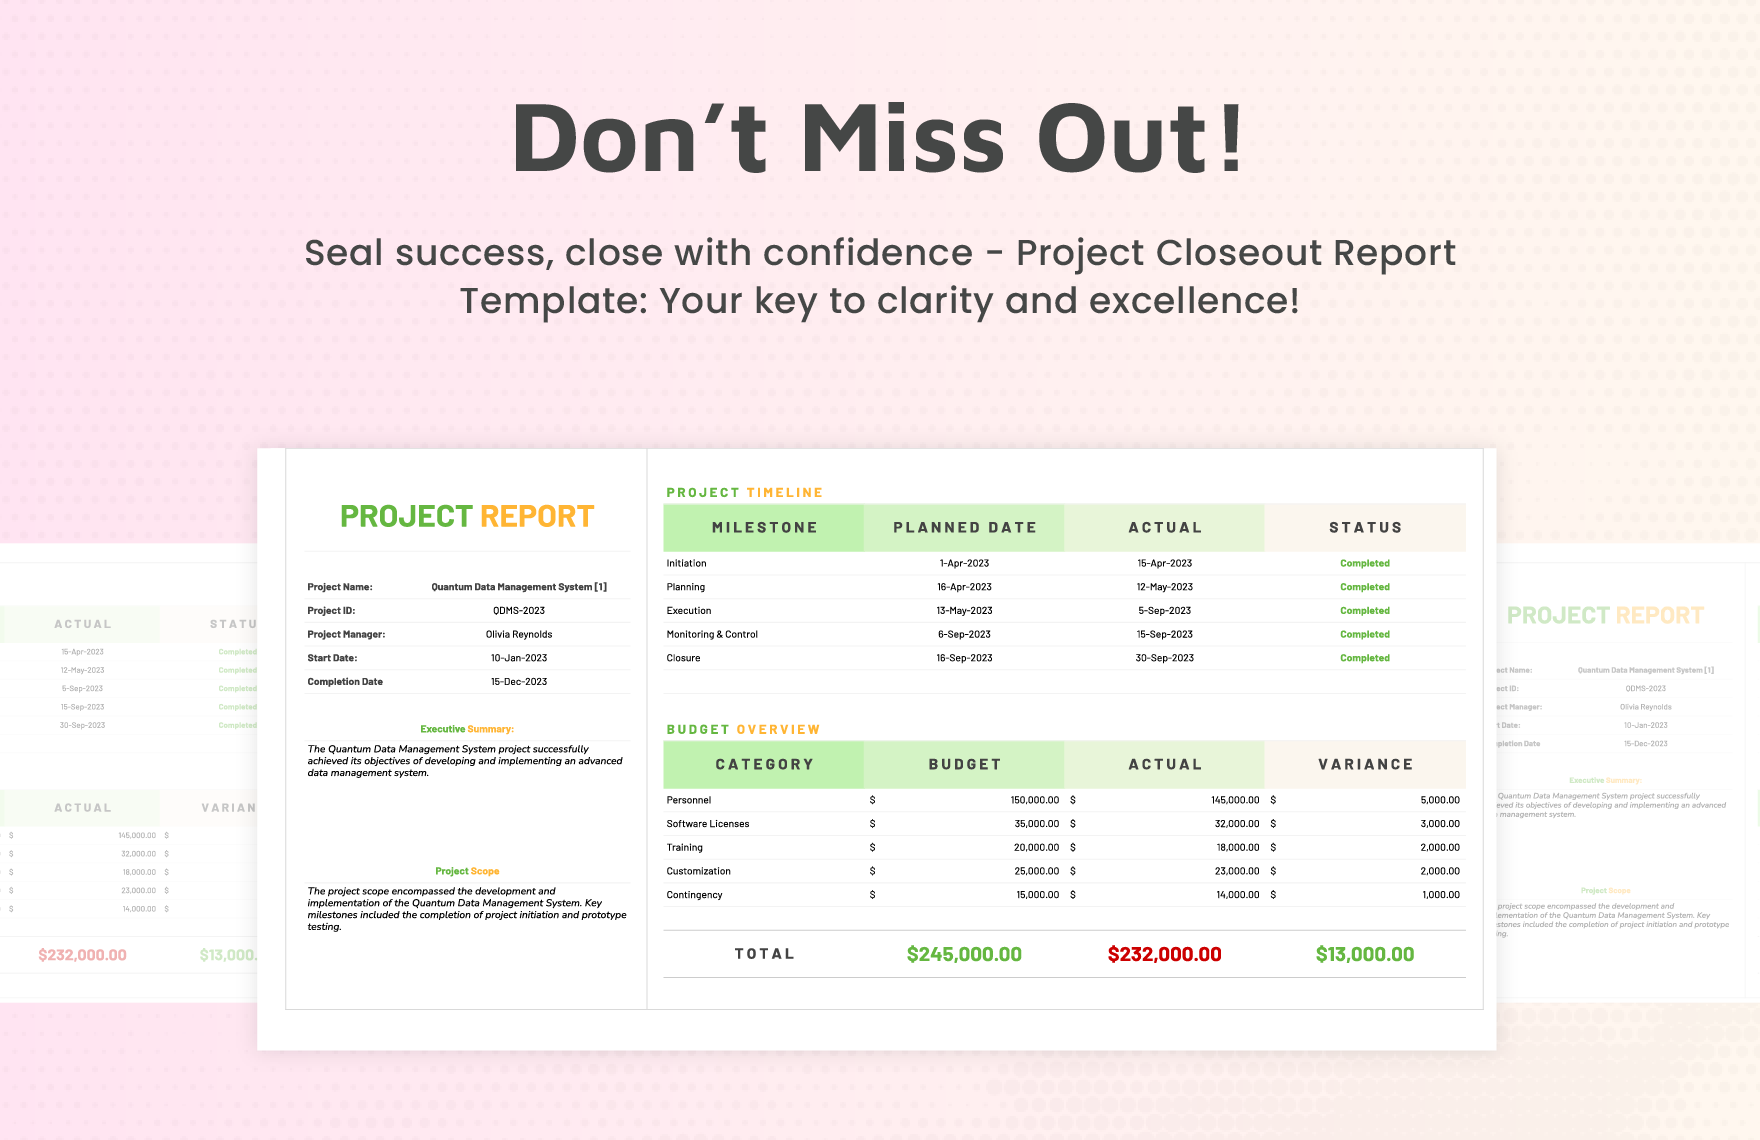 Project Closeout Report Template